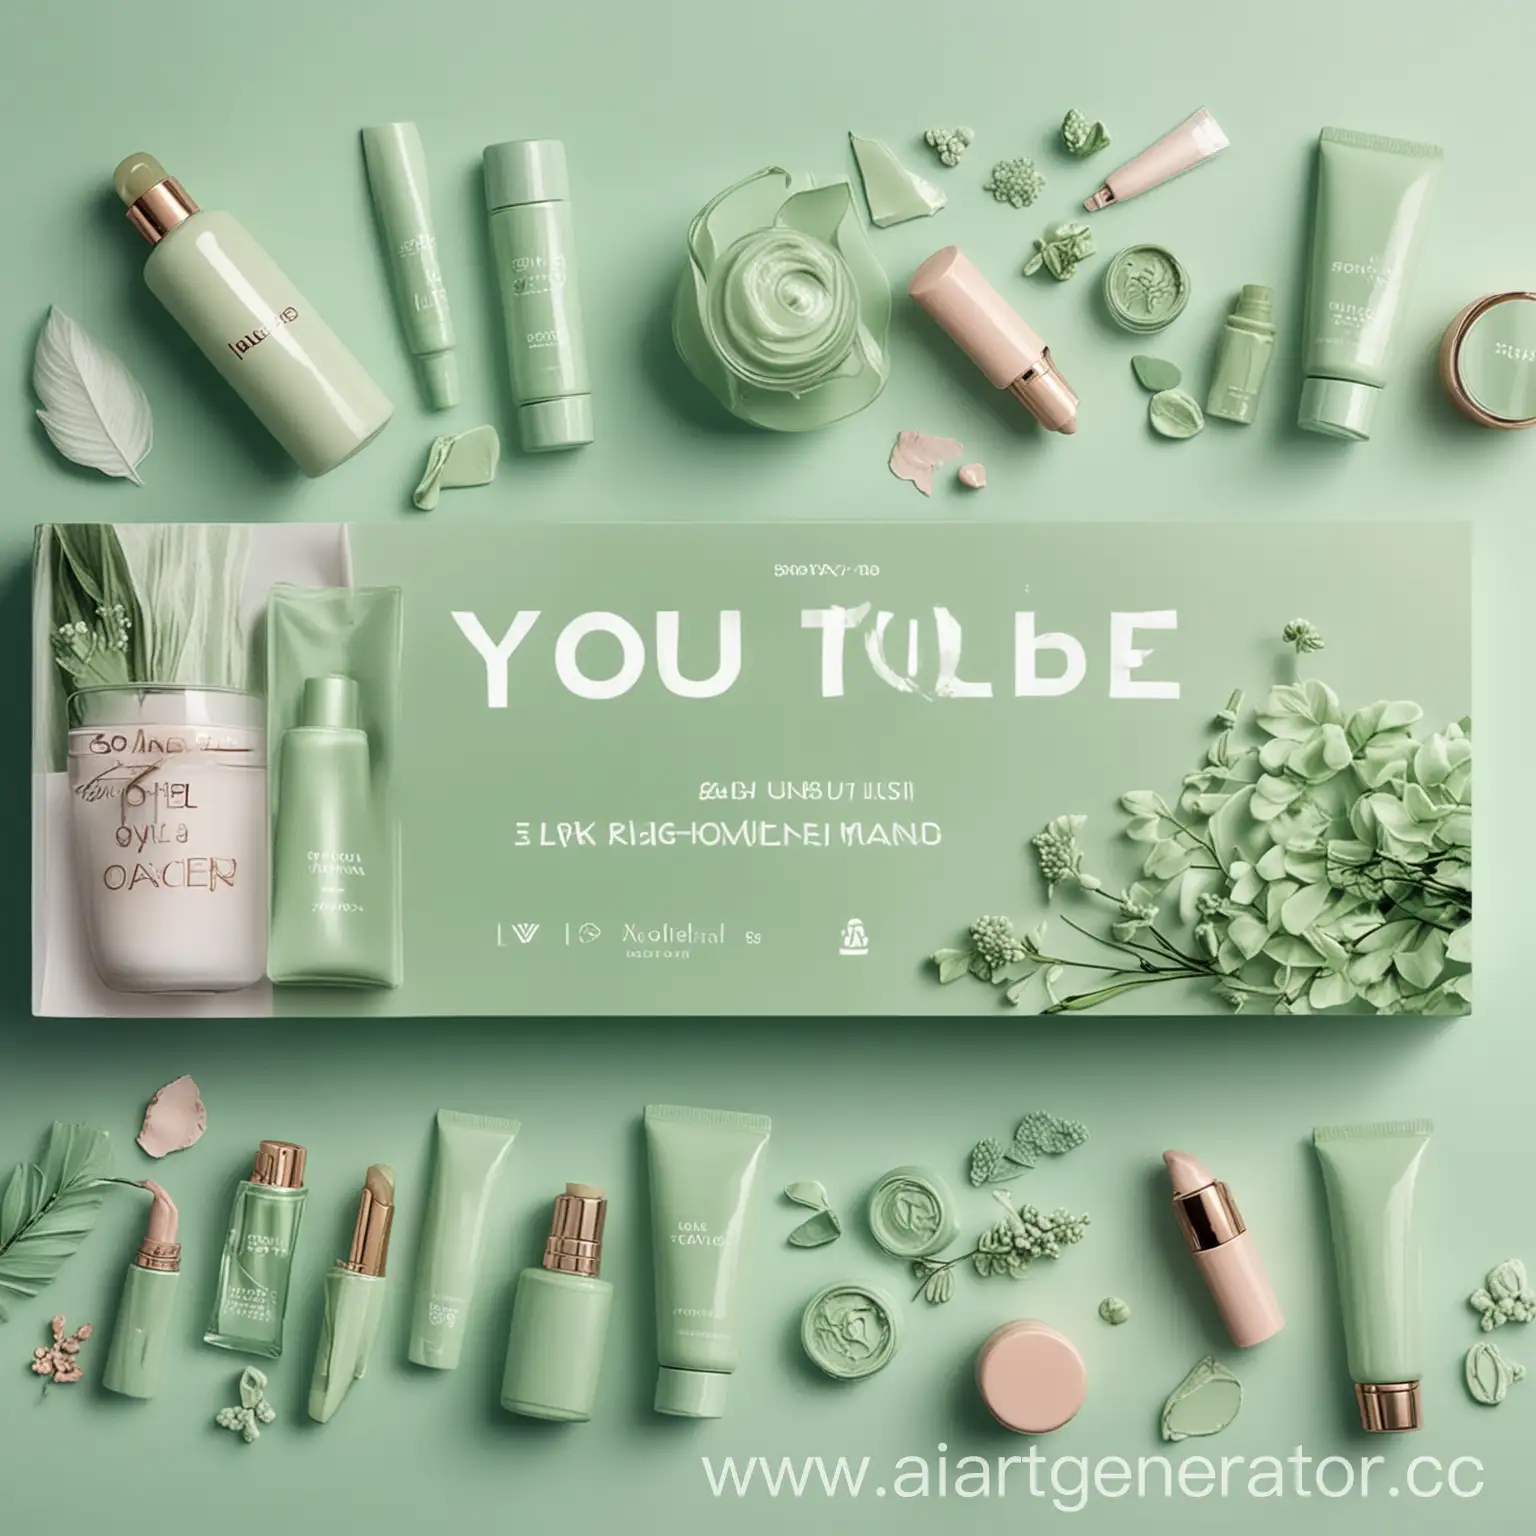 Elegant-Beauty-and-Fashion-YouTube-Channel-Cover-in-Green-Pastel-Tones